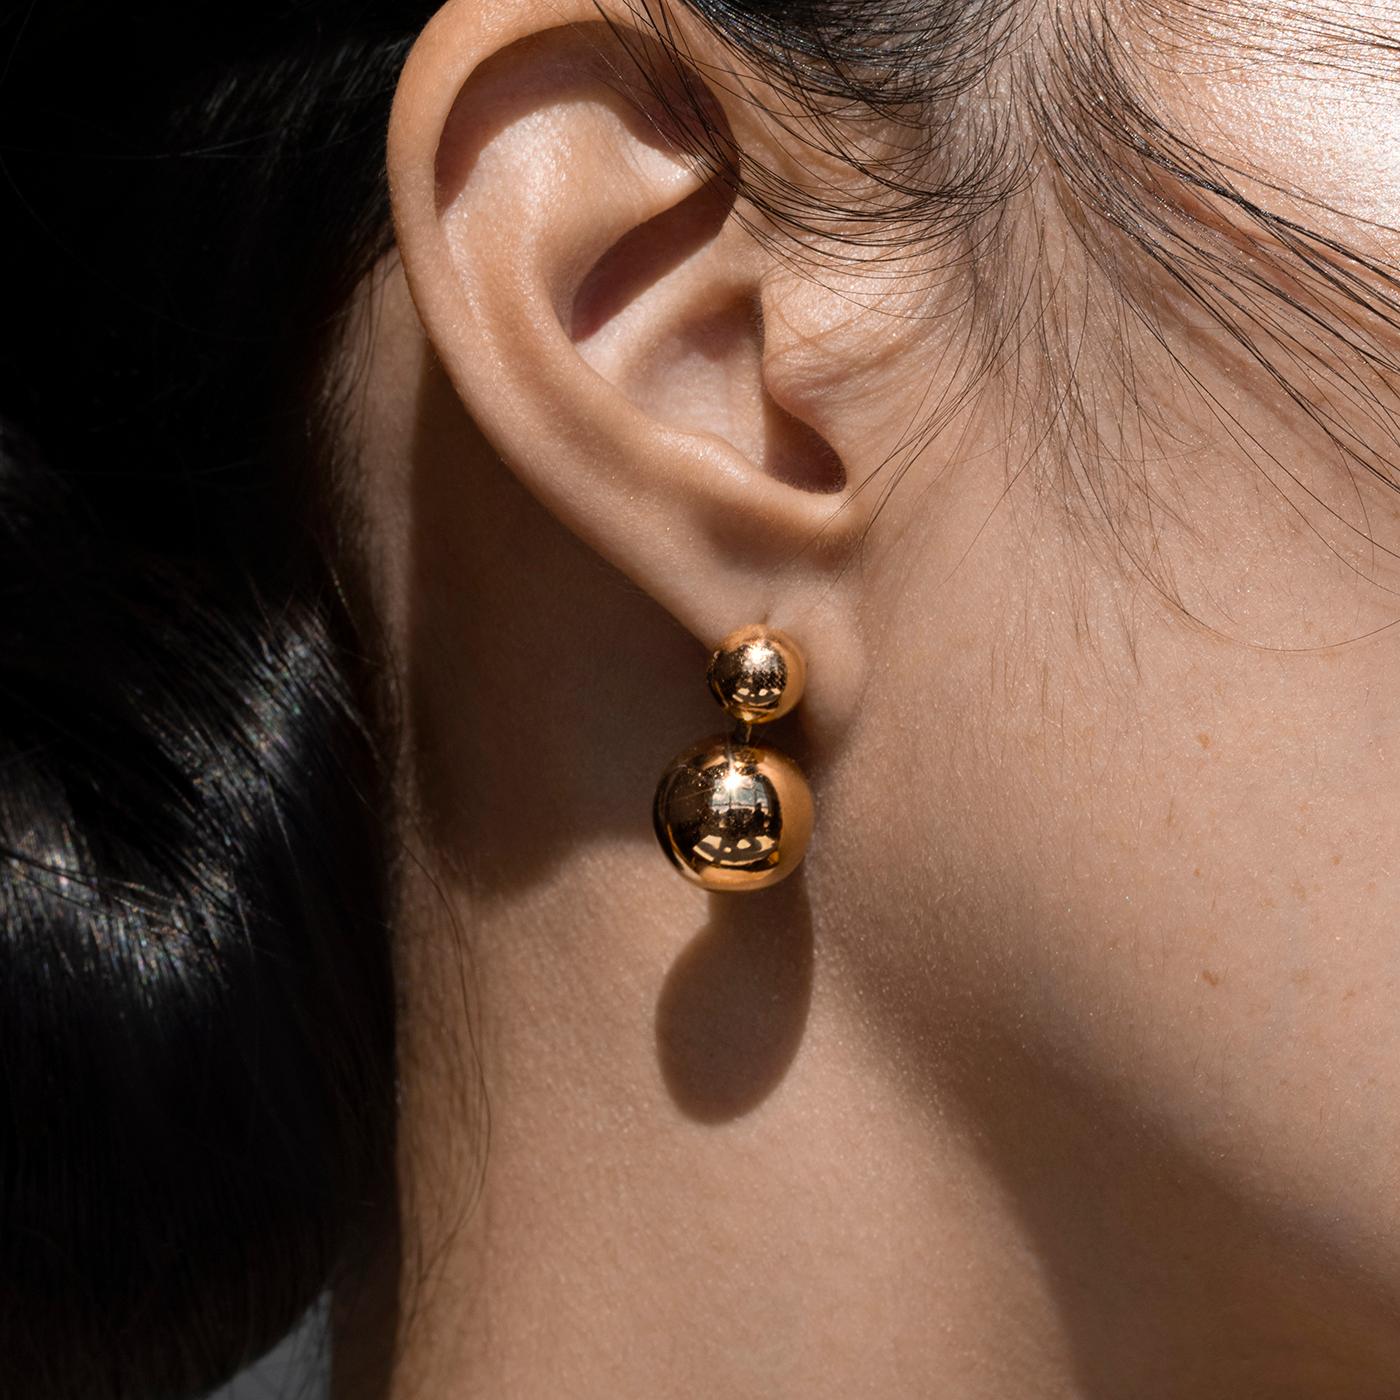 The Due Soli earrings are two brilliant golden spheres that come together to create this simple, yet refreshing pair of earrings. Originating in design from the 1-2nd Century AD, in Ancient Rome, they are the perfect pair of freshly modern earrings